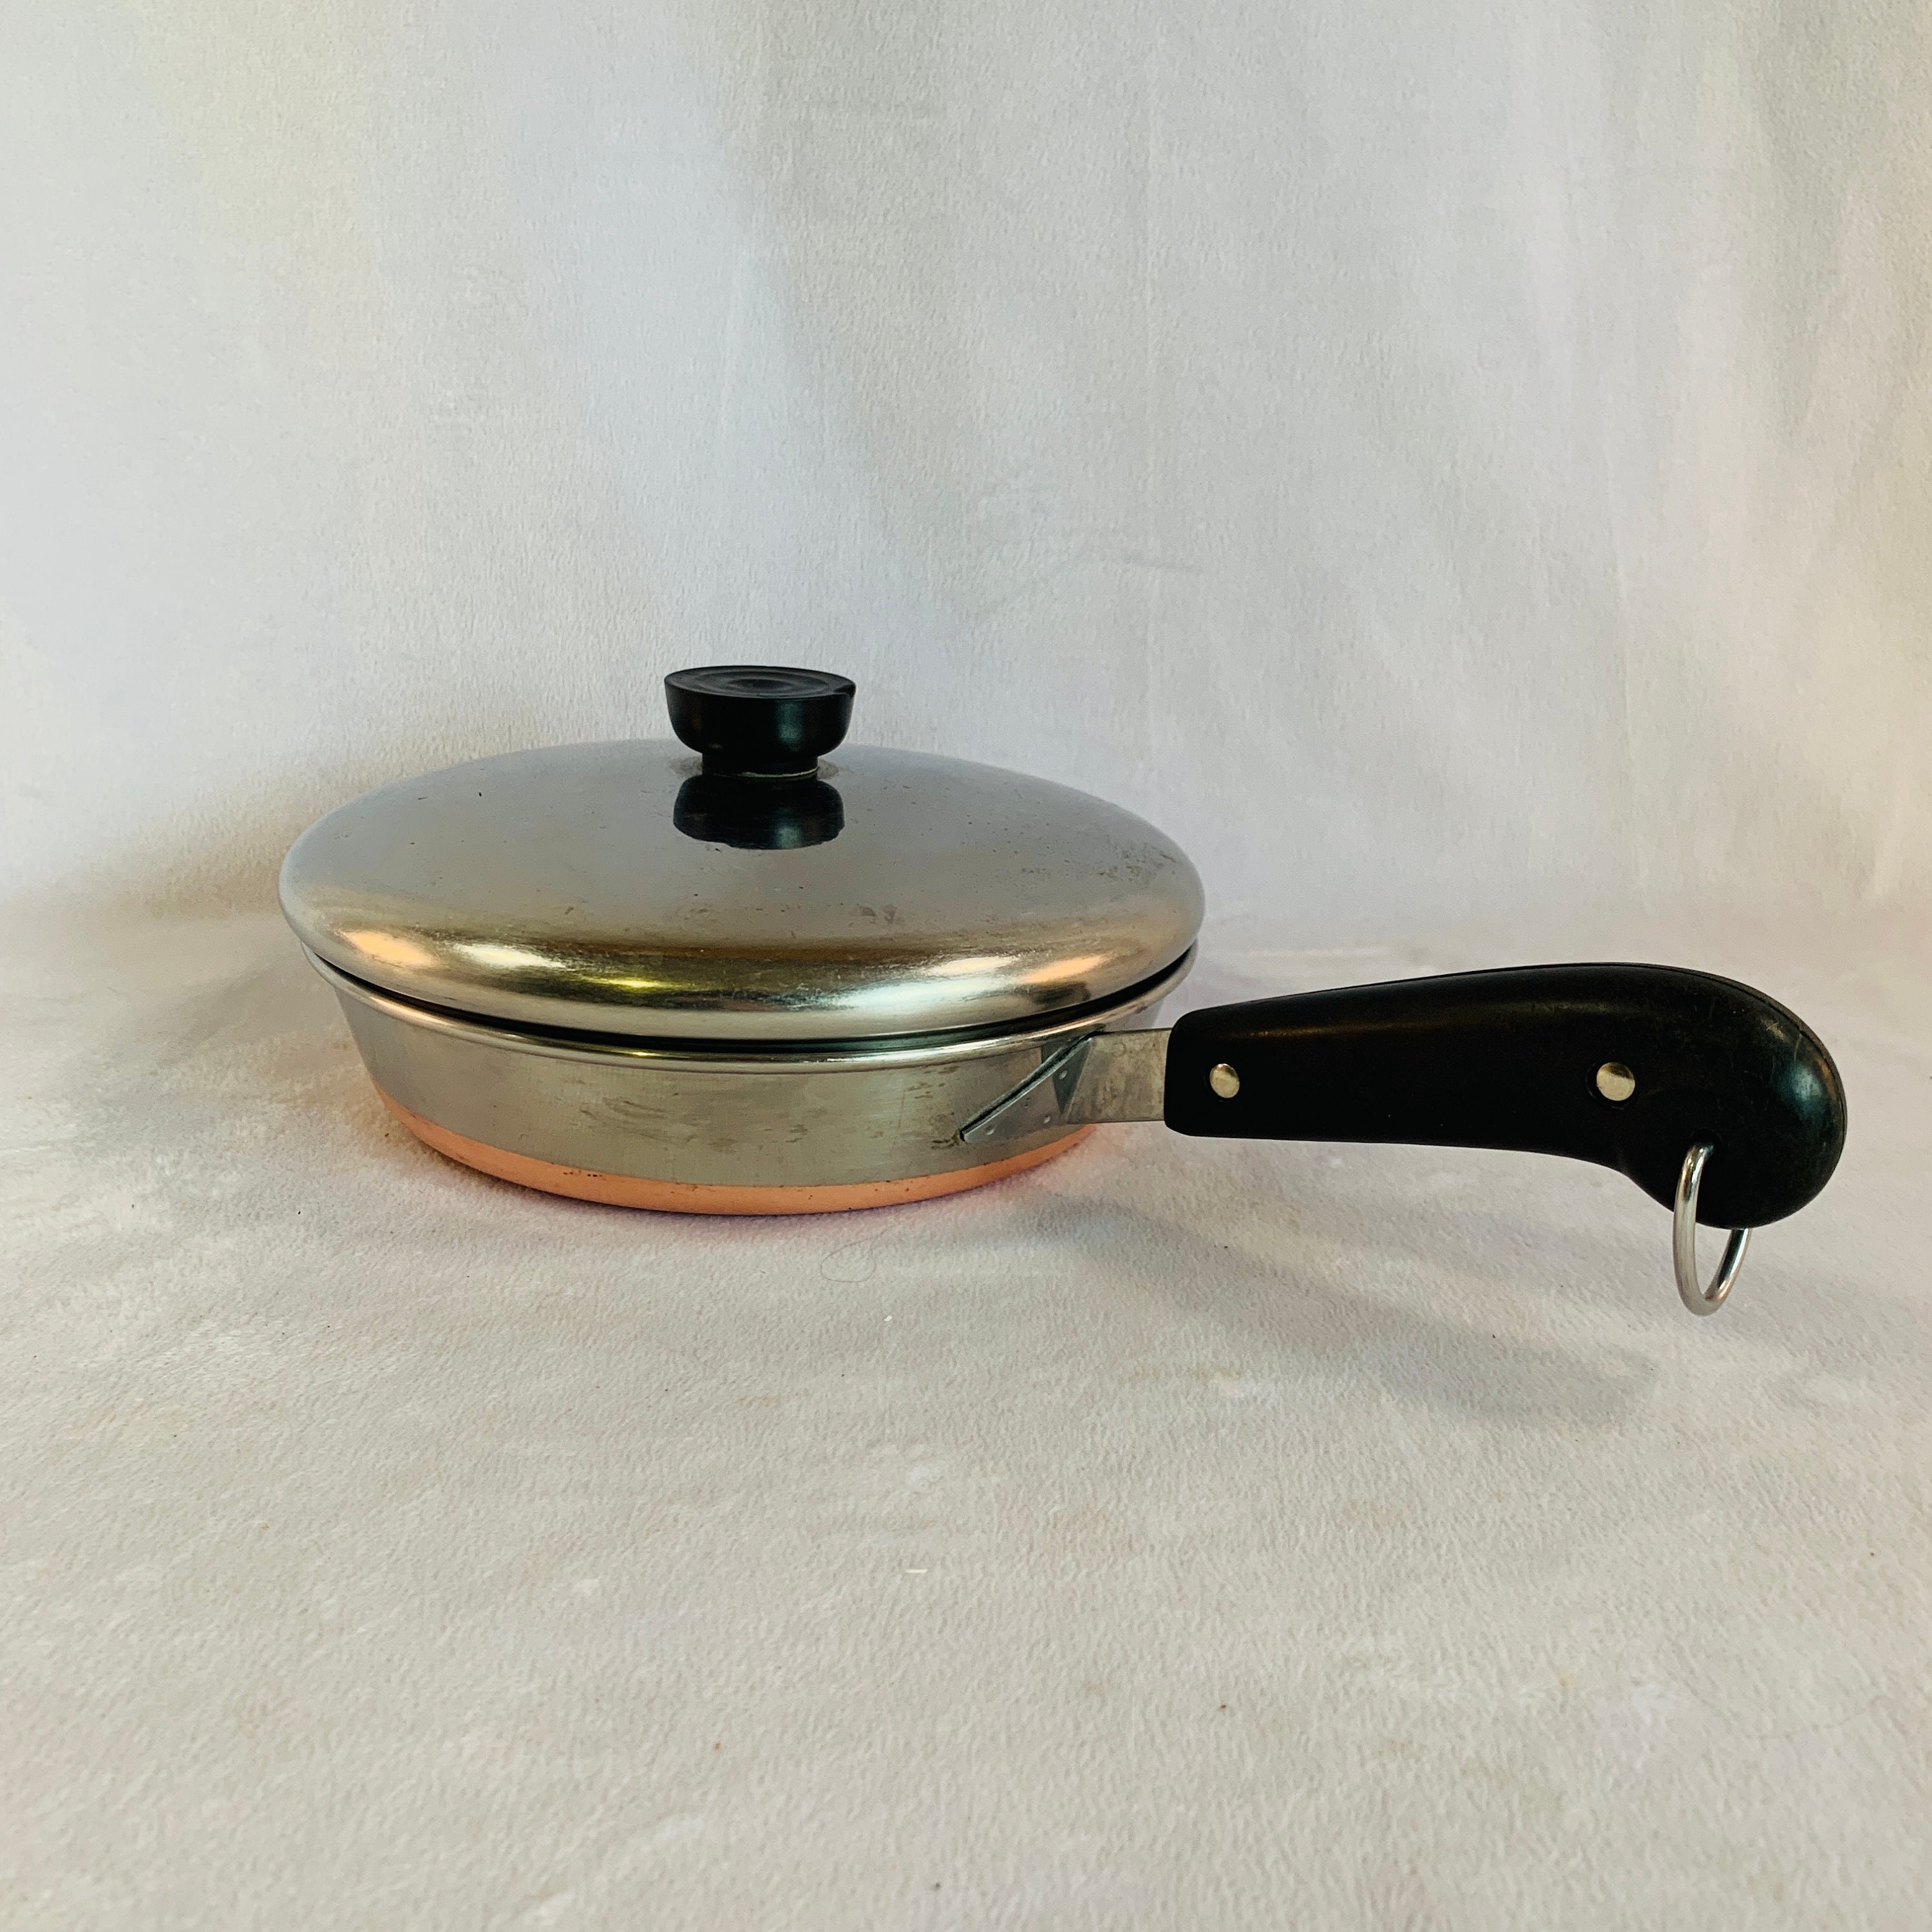 Revere Ware Pans With Lids, Copper Clad Bottom, 8 Frying Pan With